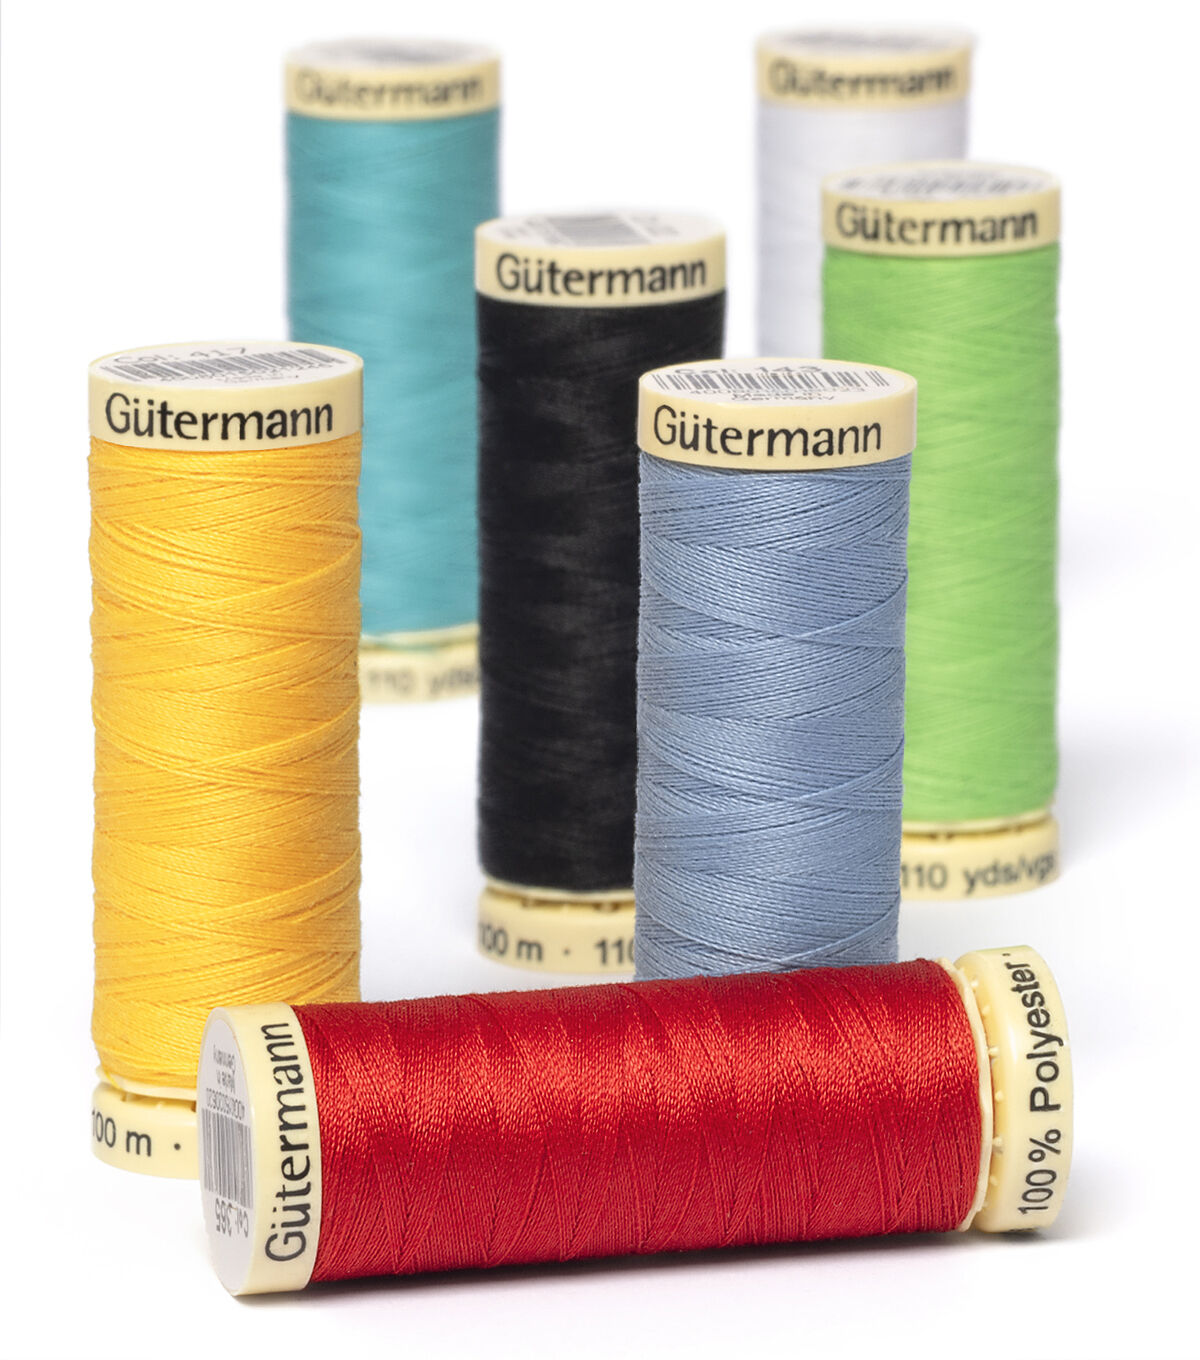 Gutermann Sew-All rPET Polyester Thread Set, Assorted, 20 Spools